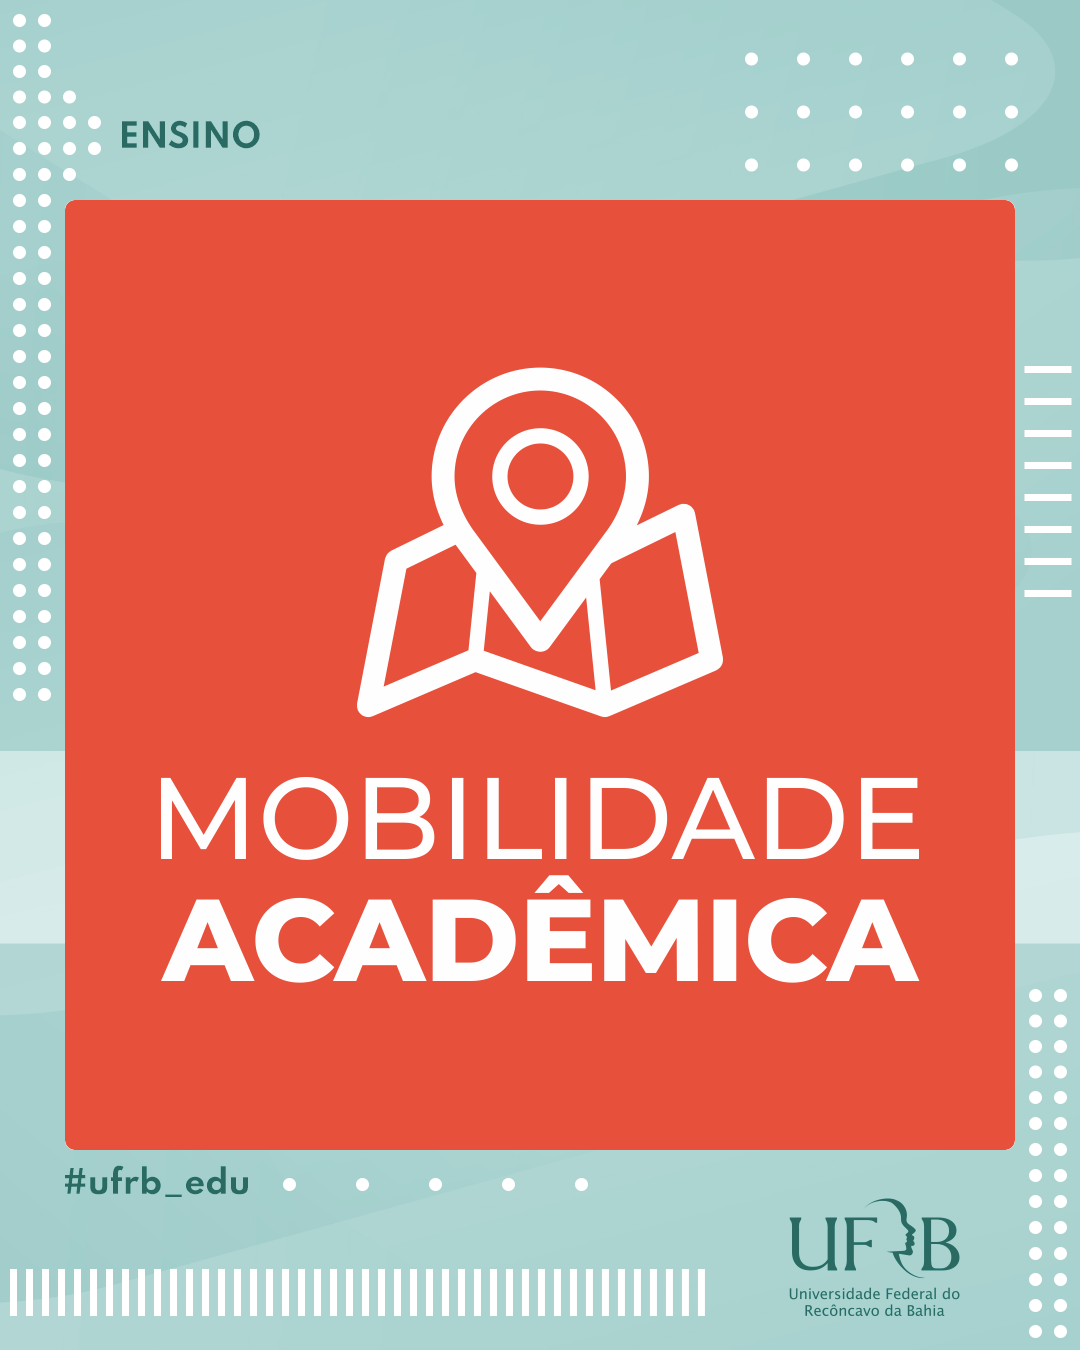 mobilidade academica ufrb feed